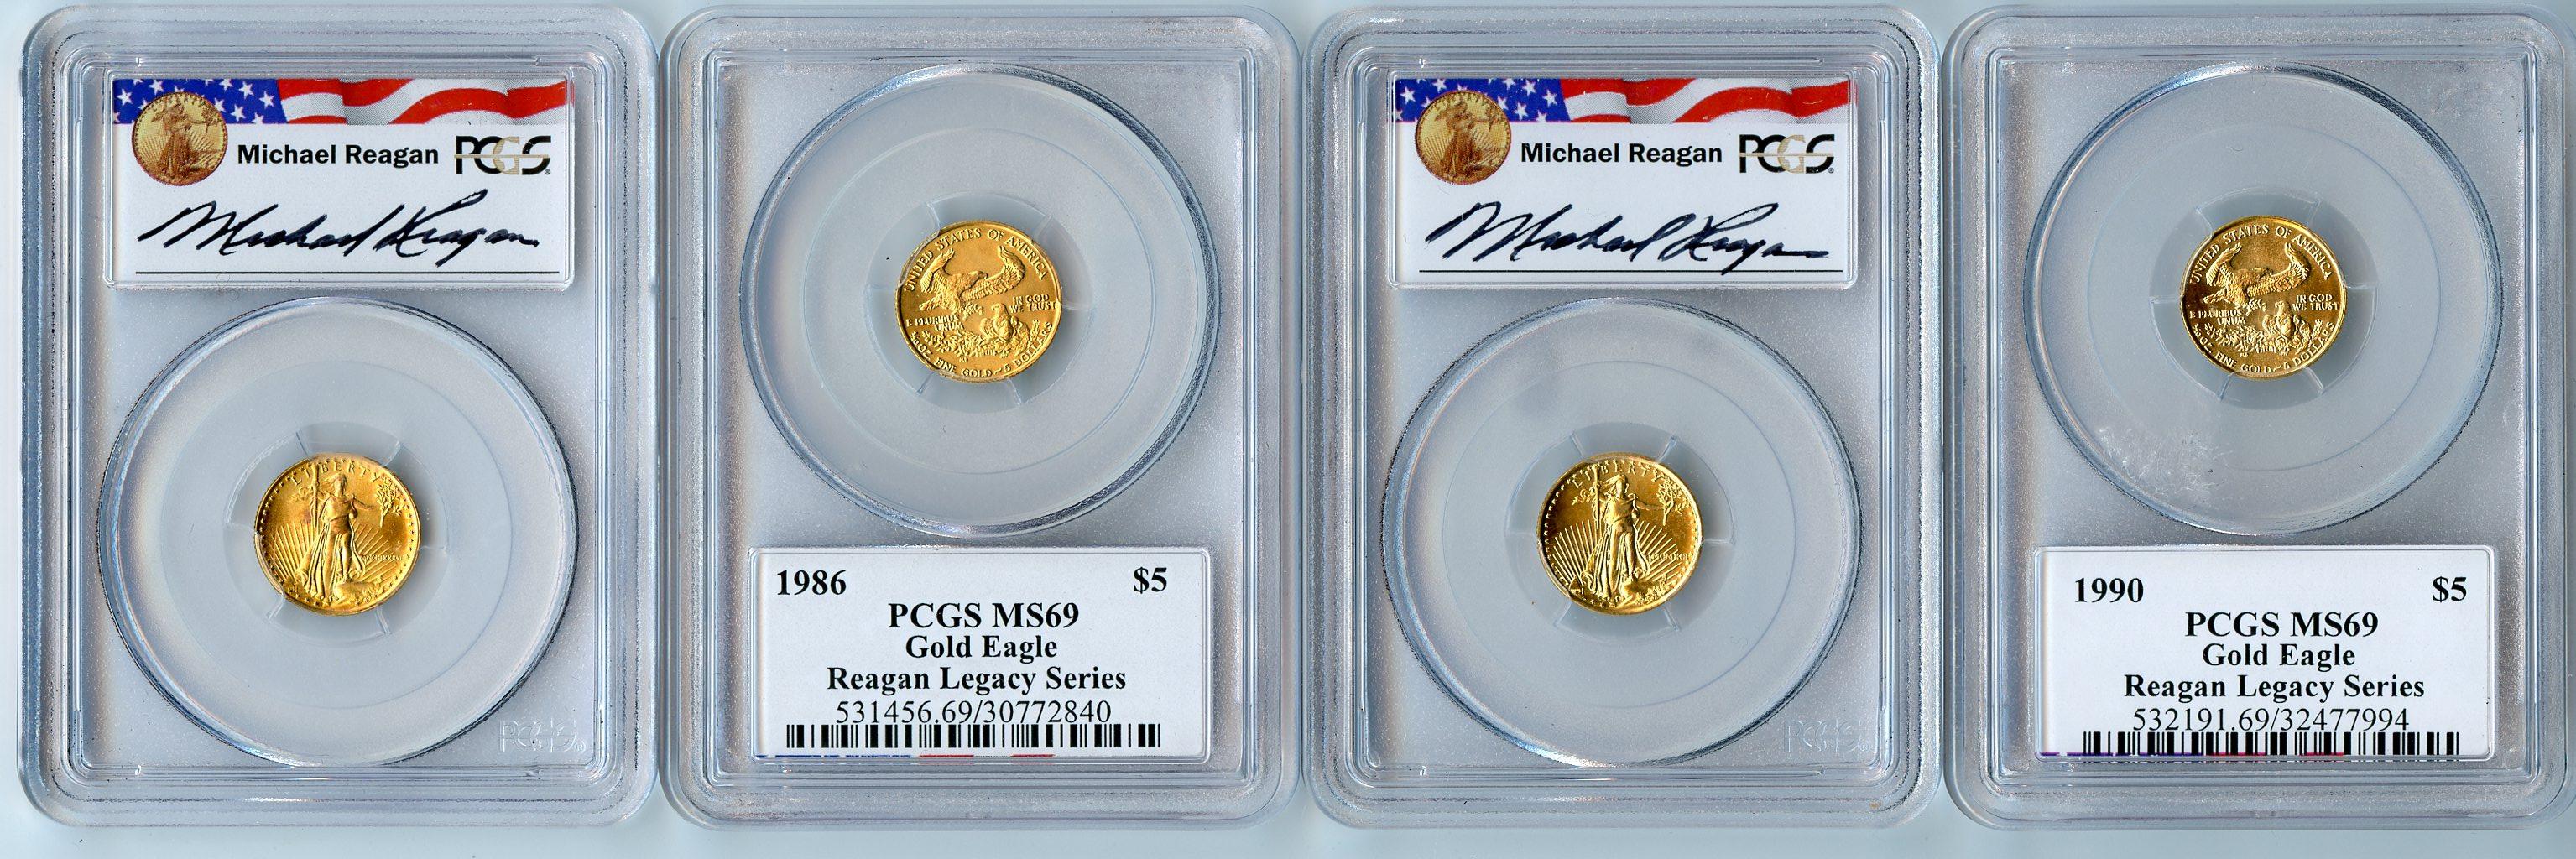 Gold $5 American Eagle 1/10th Ounce in PCGS MS 69 Michael Reagan Signature Holders Mixed Dates